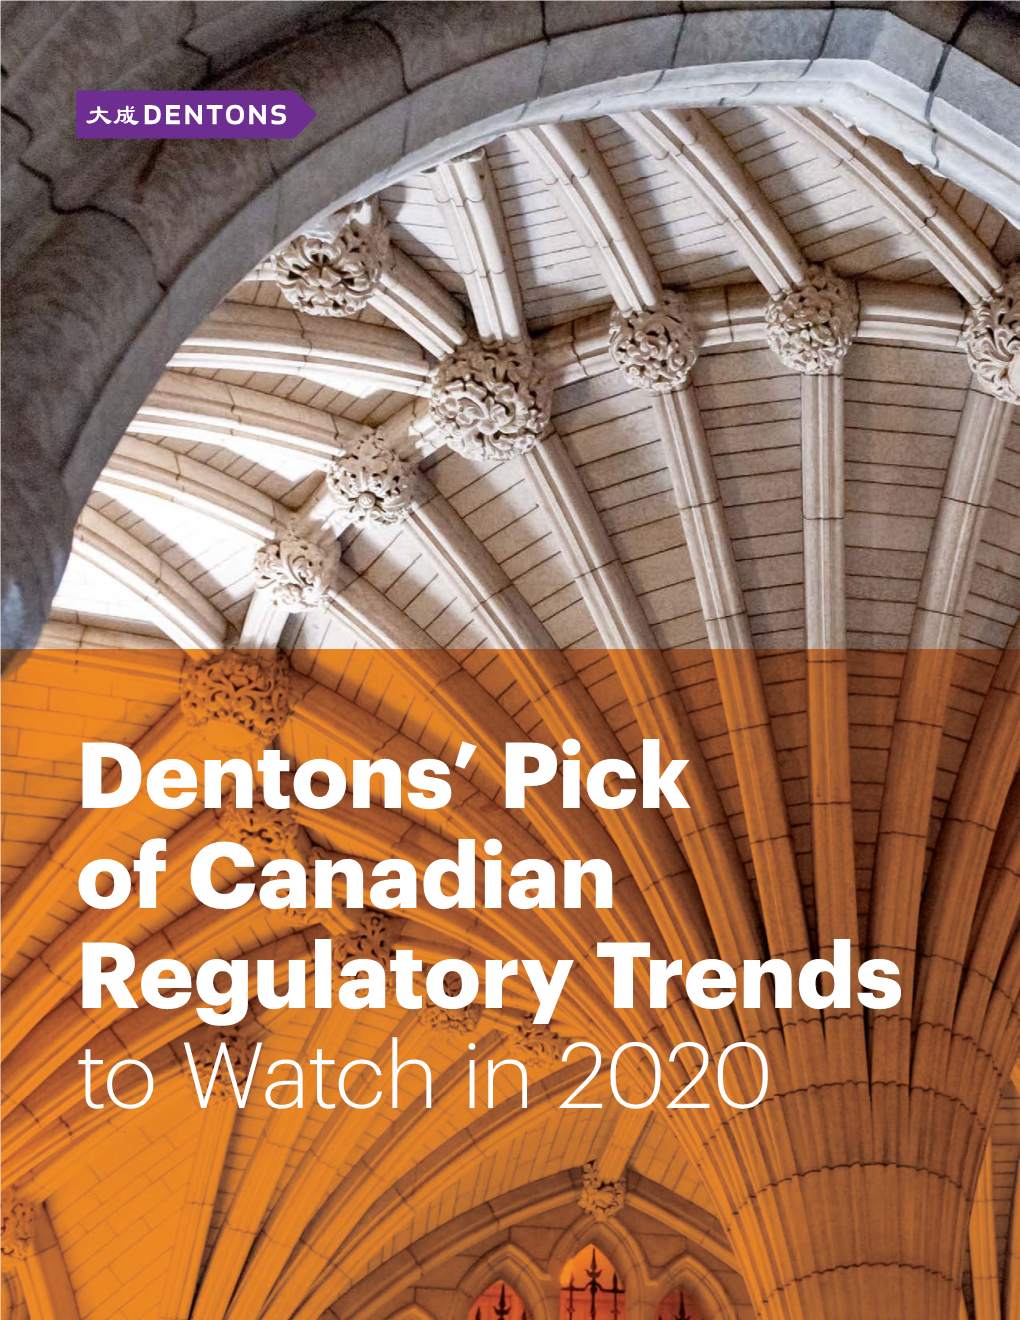 Dentons' Pick of Canadian Regulatory Trends to Watch in 2020